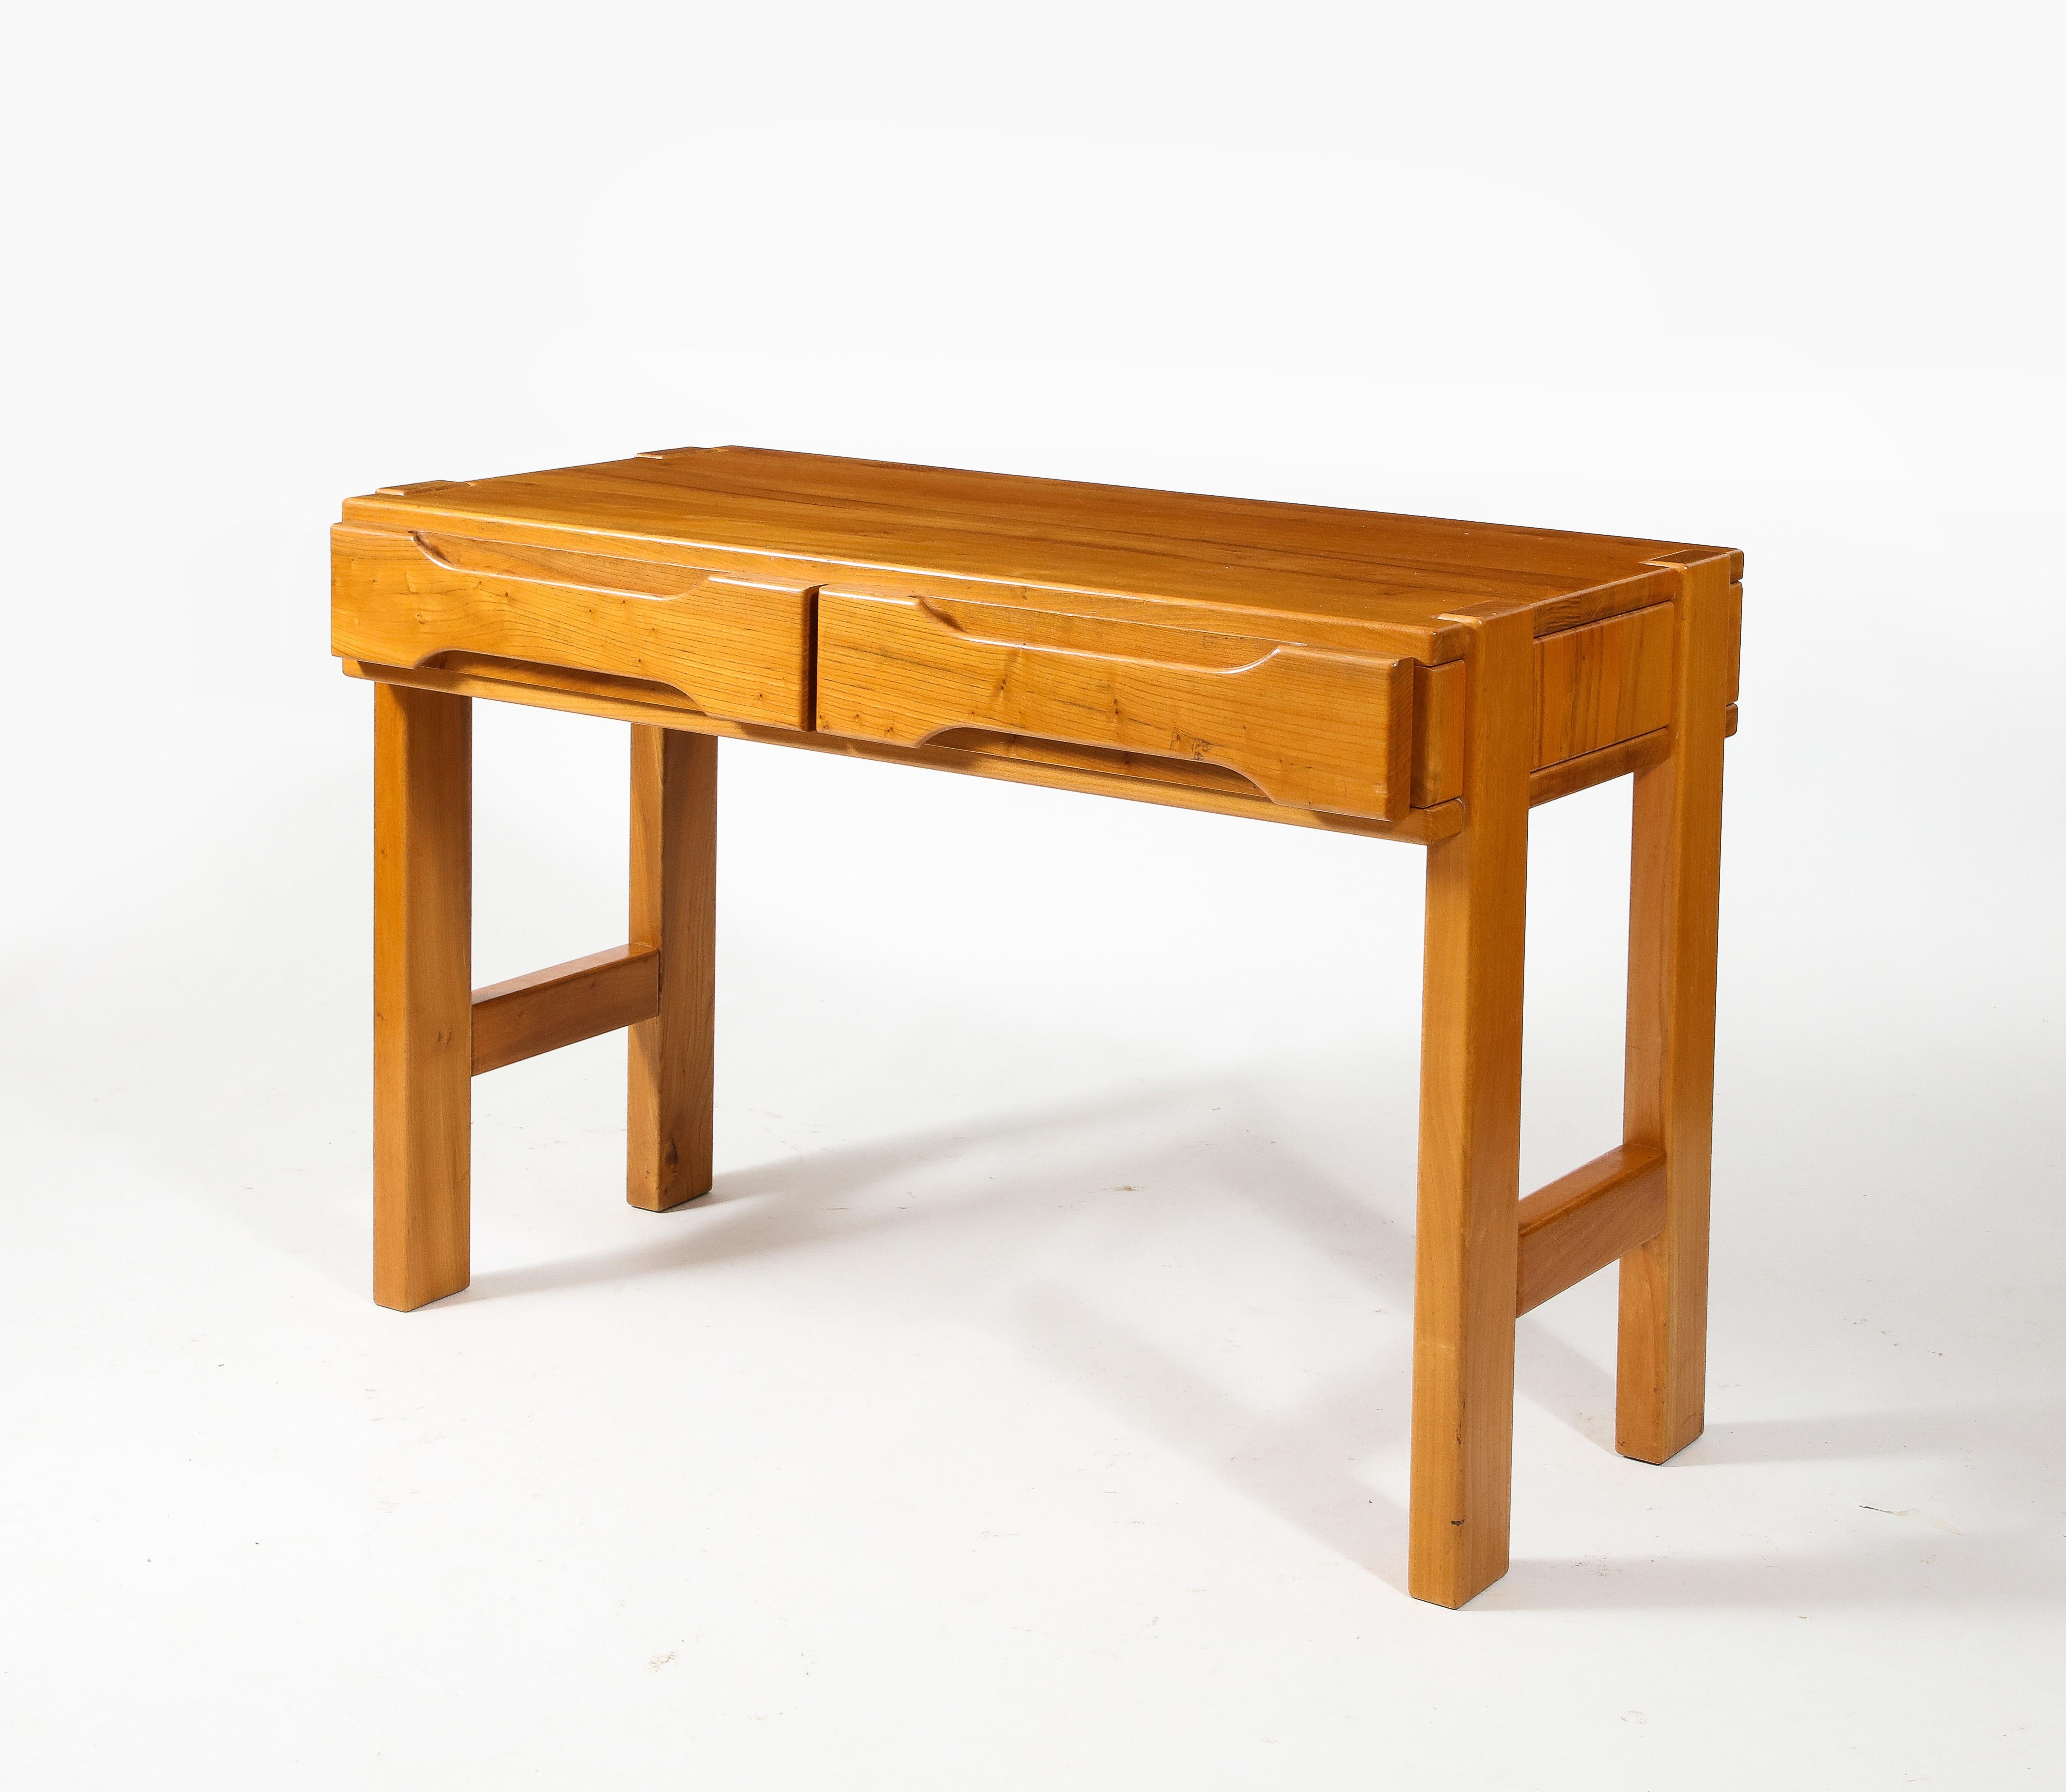 Brutalist desk in solid pine by Maison Regain. Elegant and solid construction with an intricate dowel system and handles directly cut in the drawer's faces. Original patina.